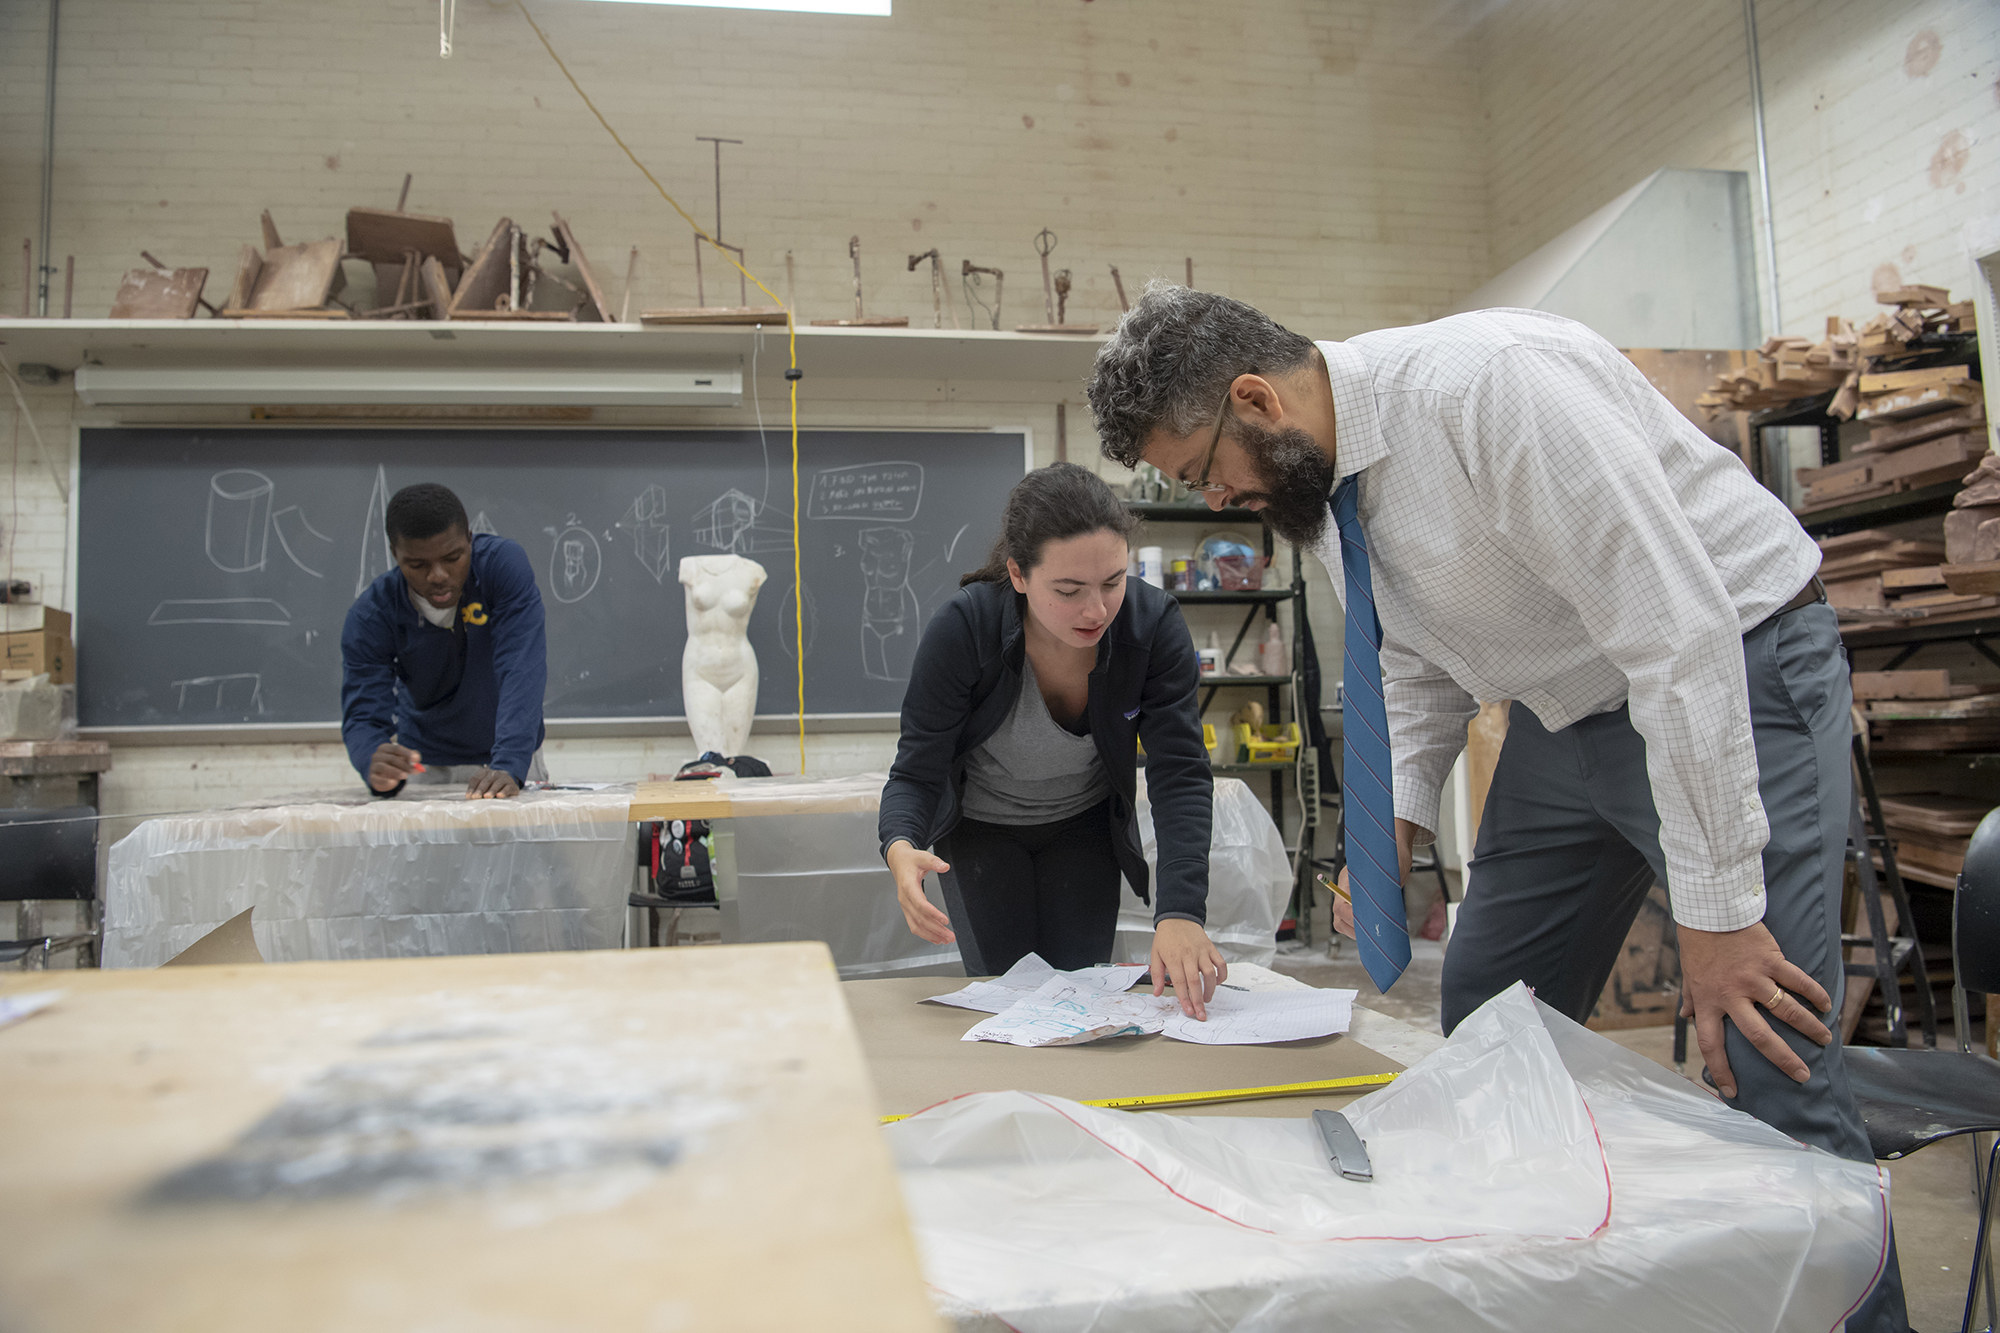 Image for Sculpture Professor Frederick Wright Jones consults with a student in a studio art class. Our faculty exhibit nationwide, and their own experiences provide insight for students who wish to pursue careers in artistic fields.